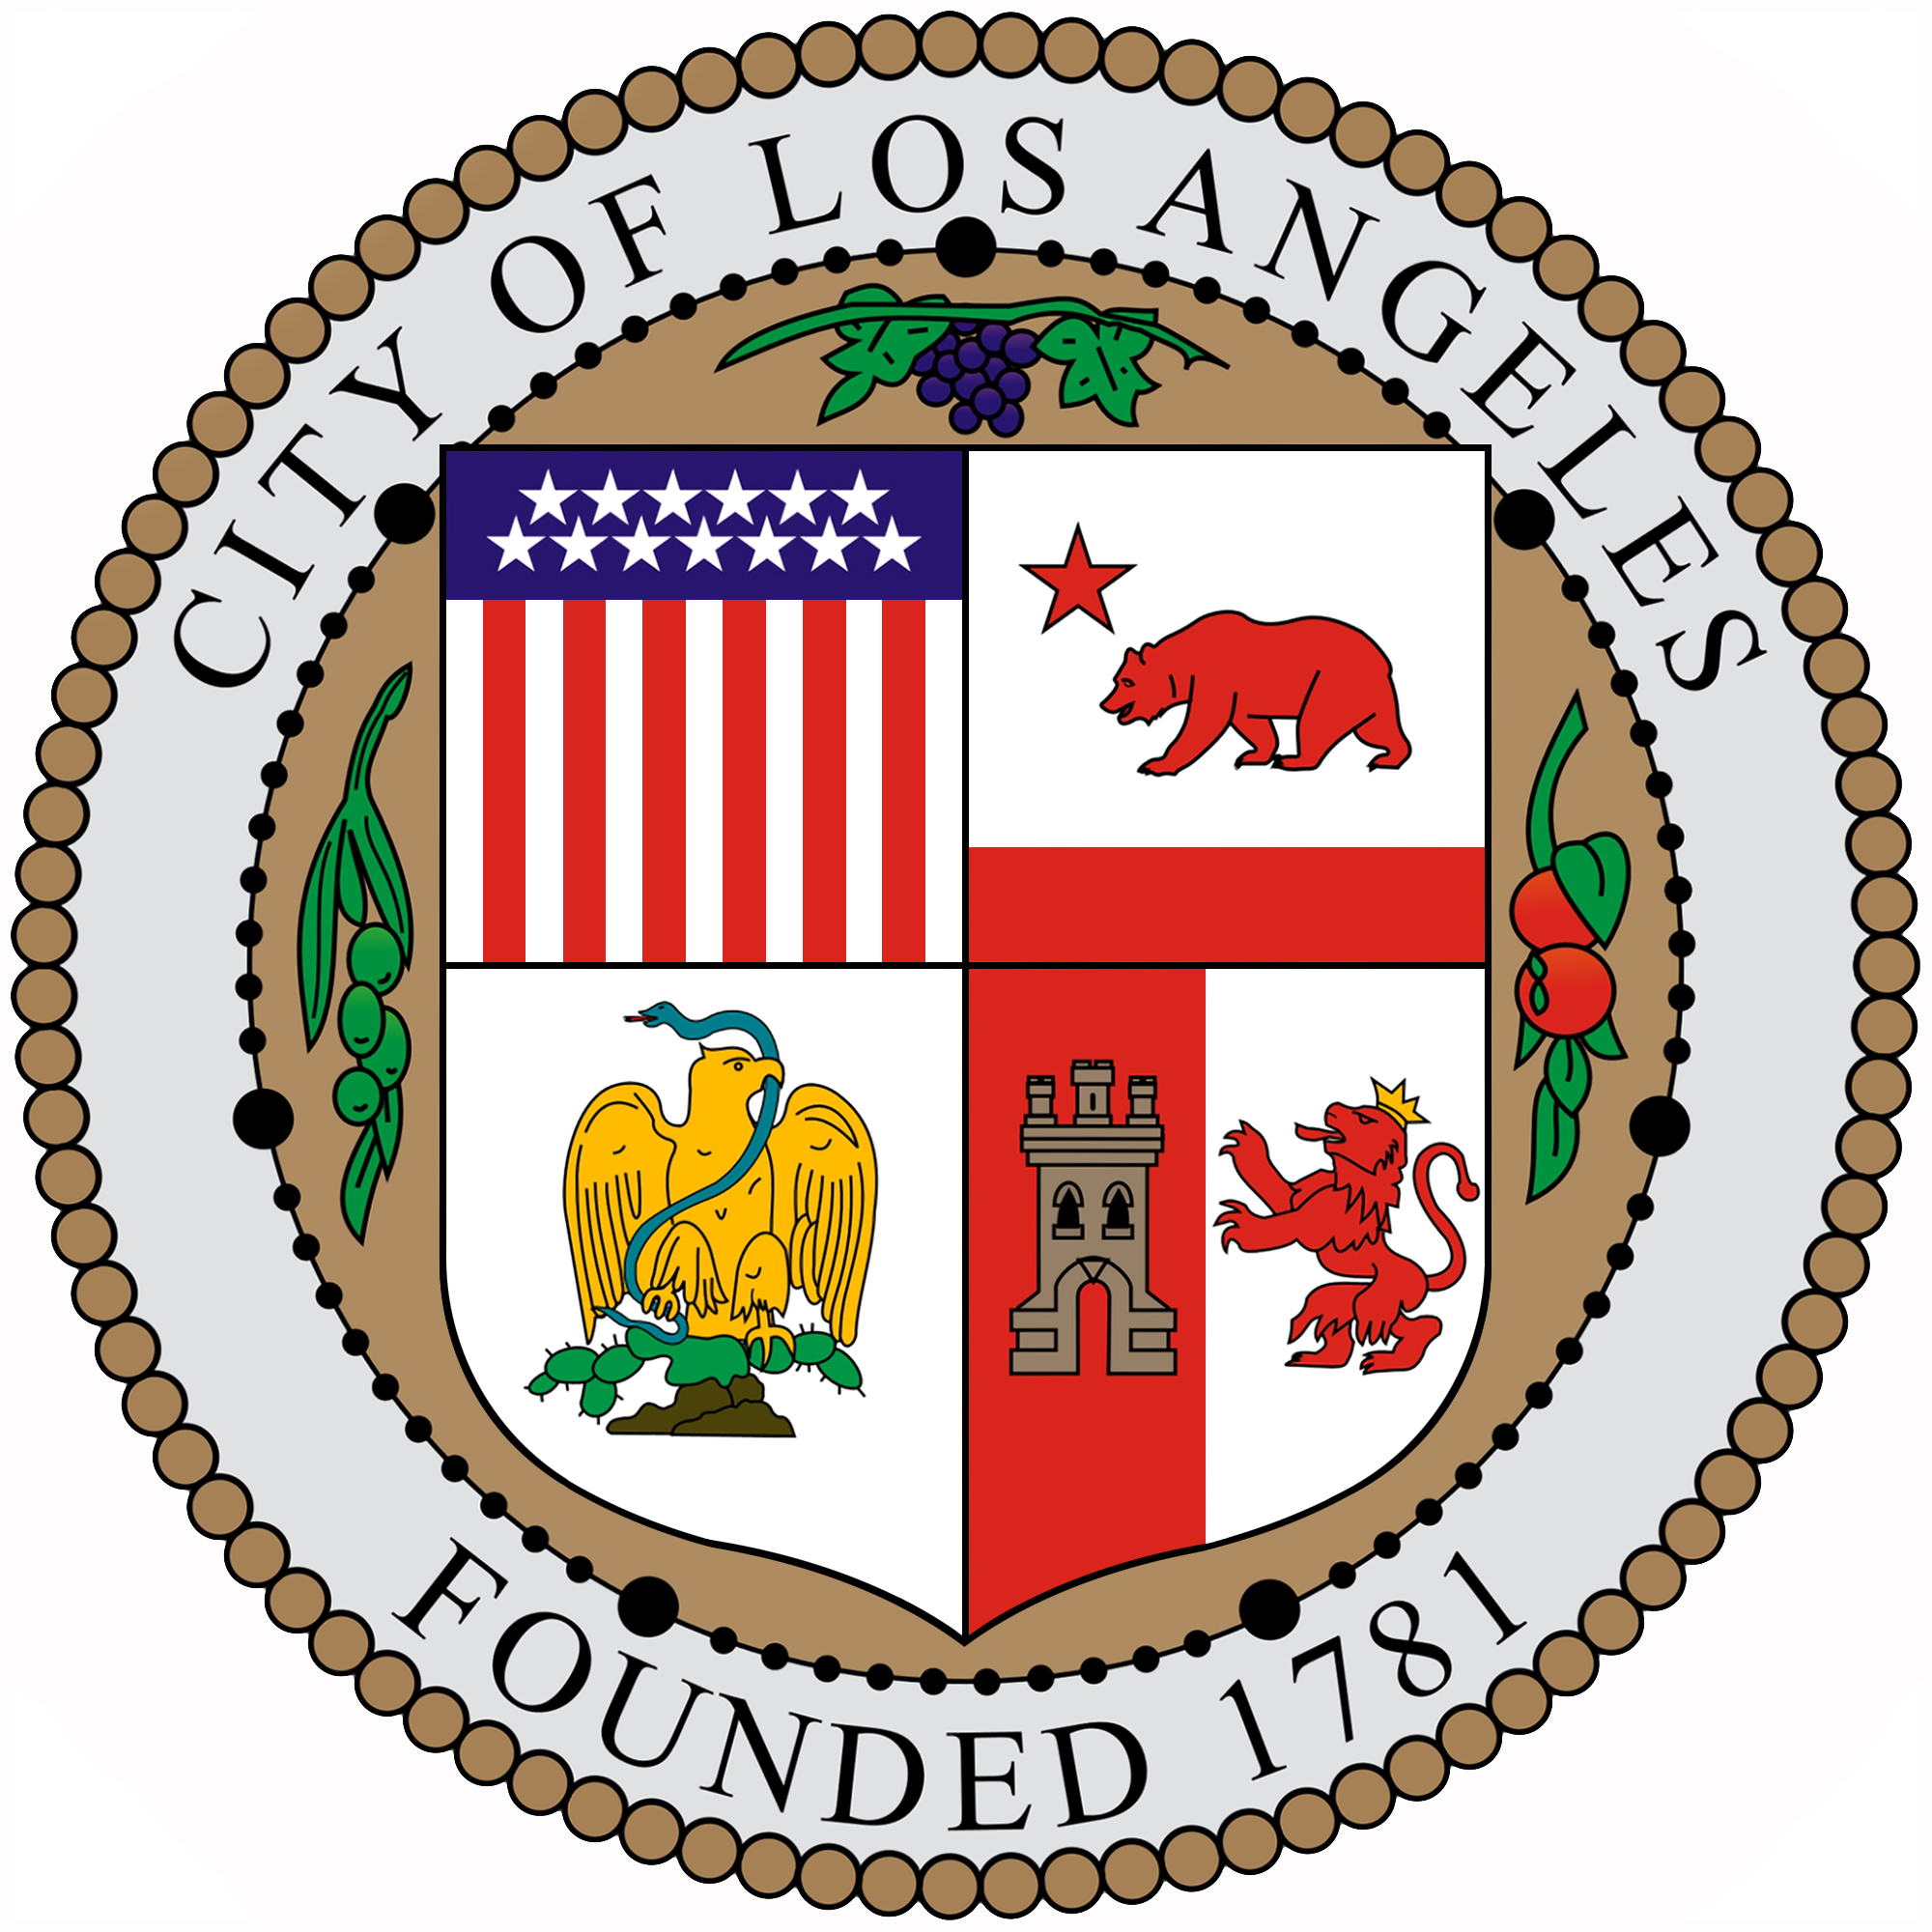 An Open Letter to the Los Angeles Mayoral Candidates